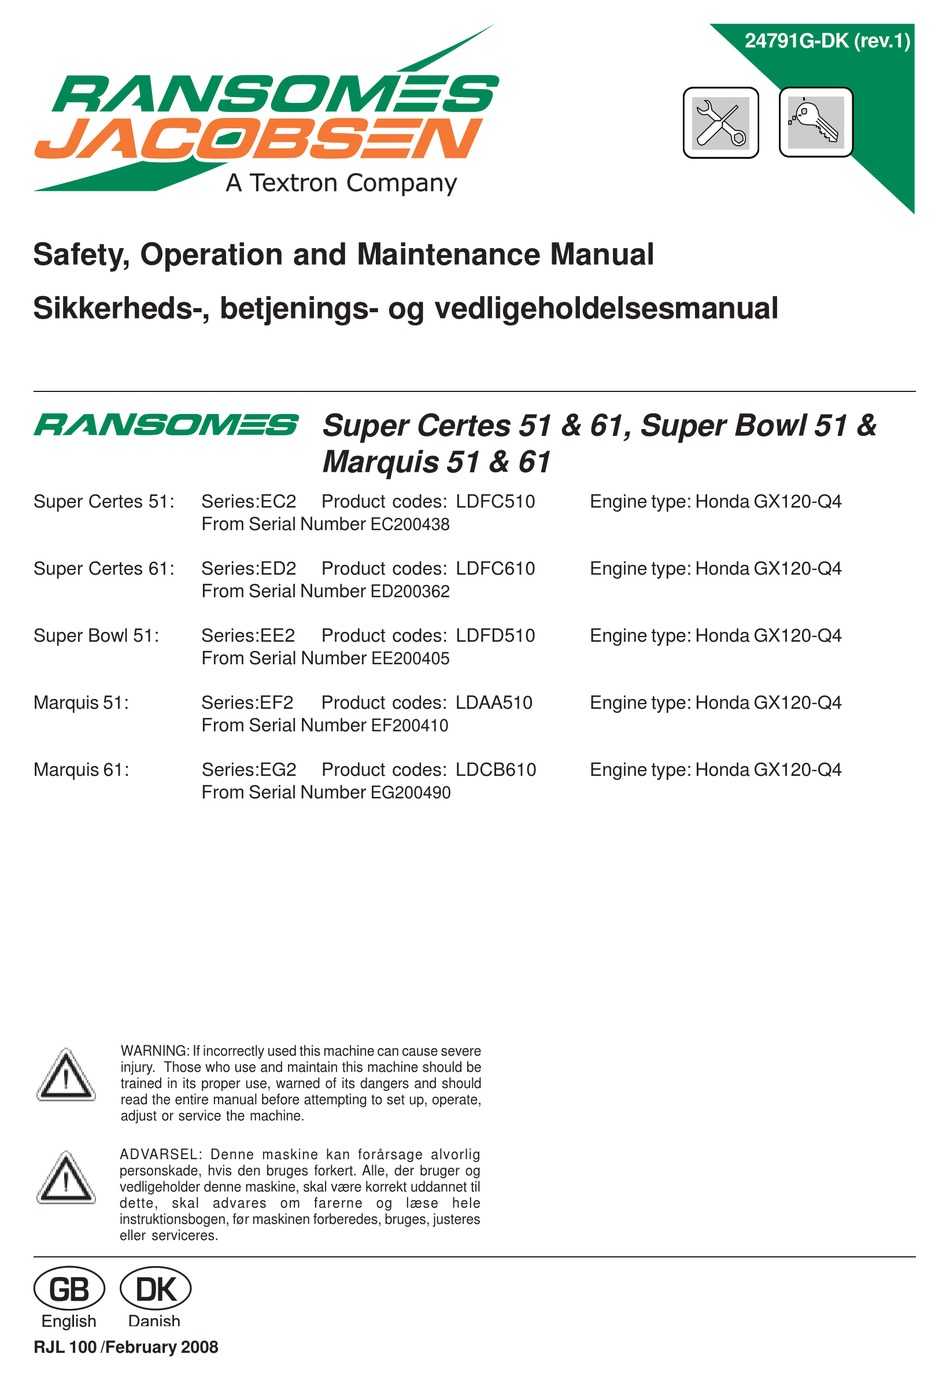 RANSOMES SUPER CERTES 51 SAFETY, OPERATION AND MAINTENANCE MANUAL Pdf